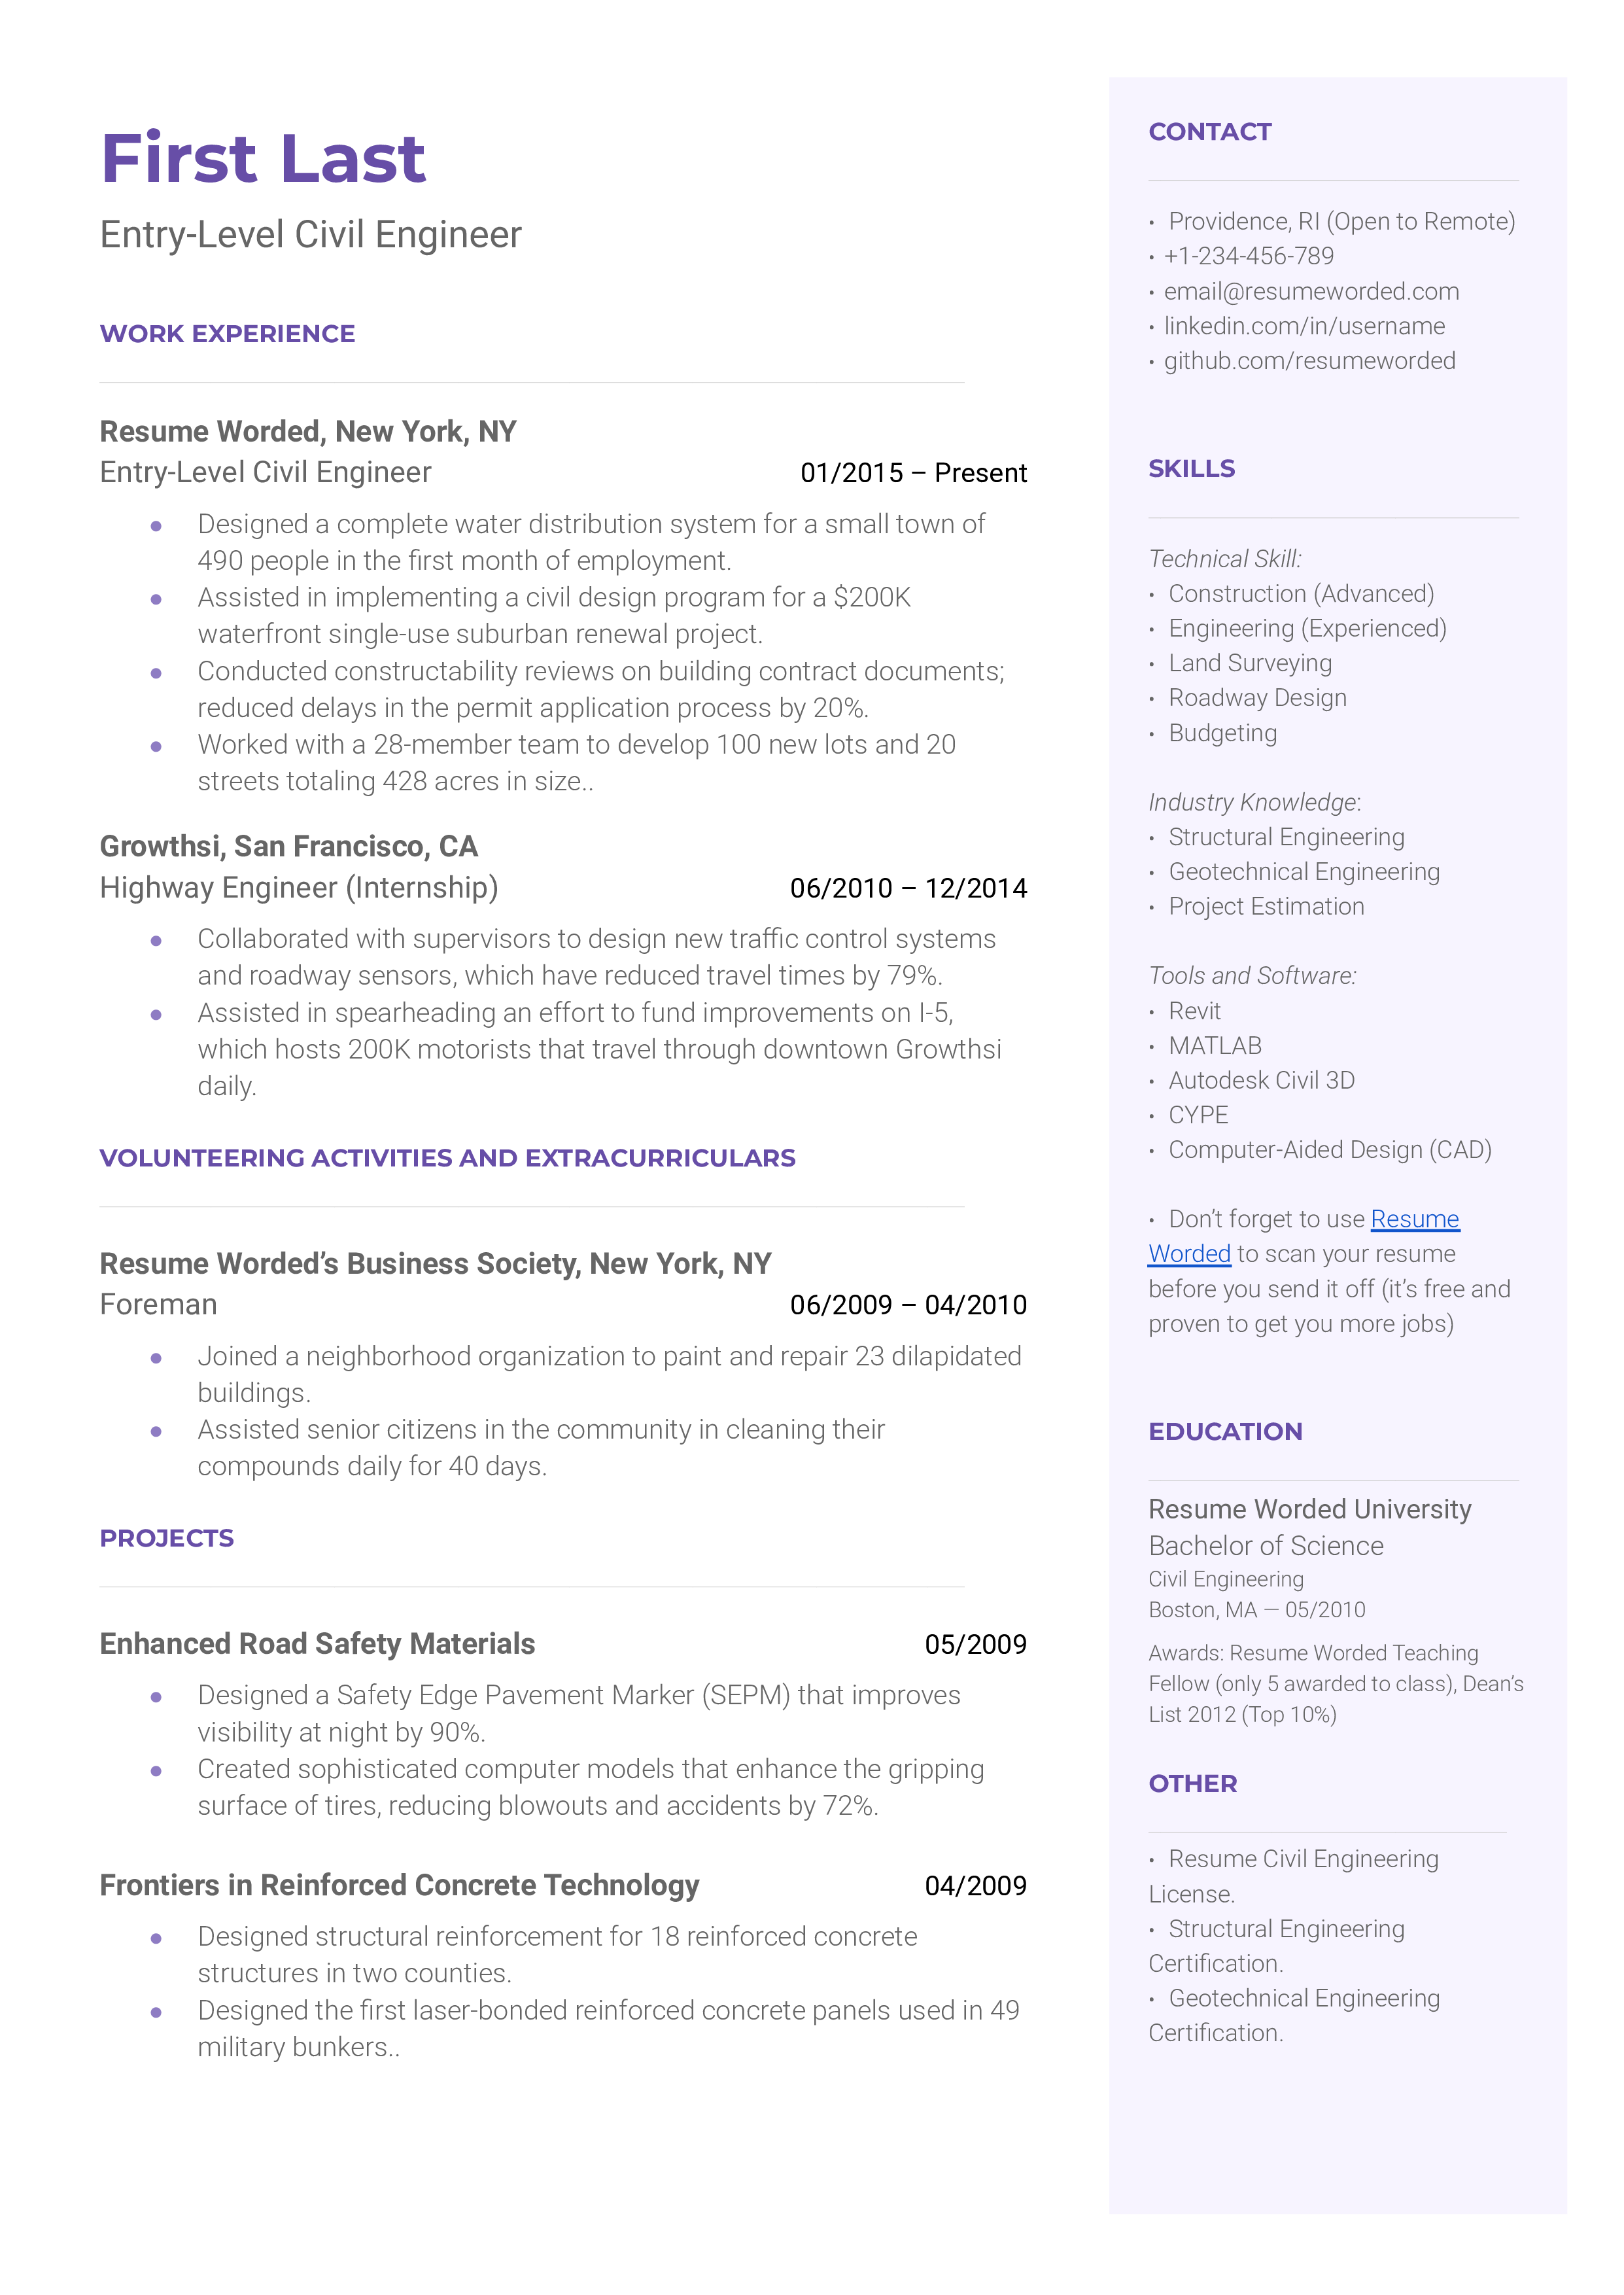 A detailed CV for an Entry-Level Civil Engineer showcasing software skills and internship experiences.